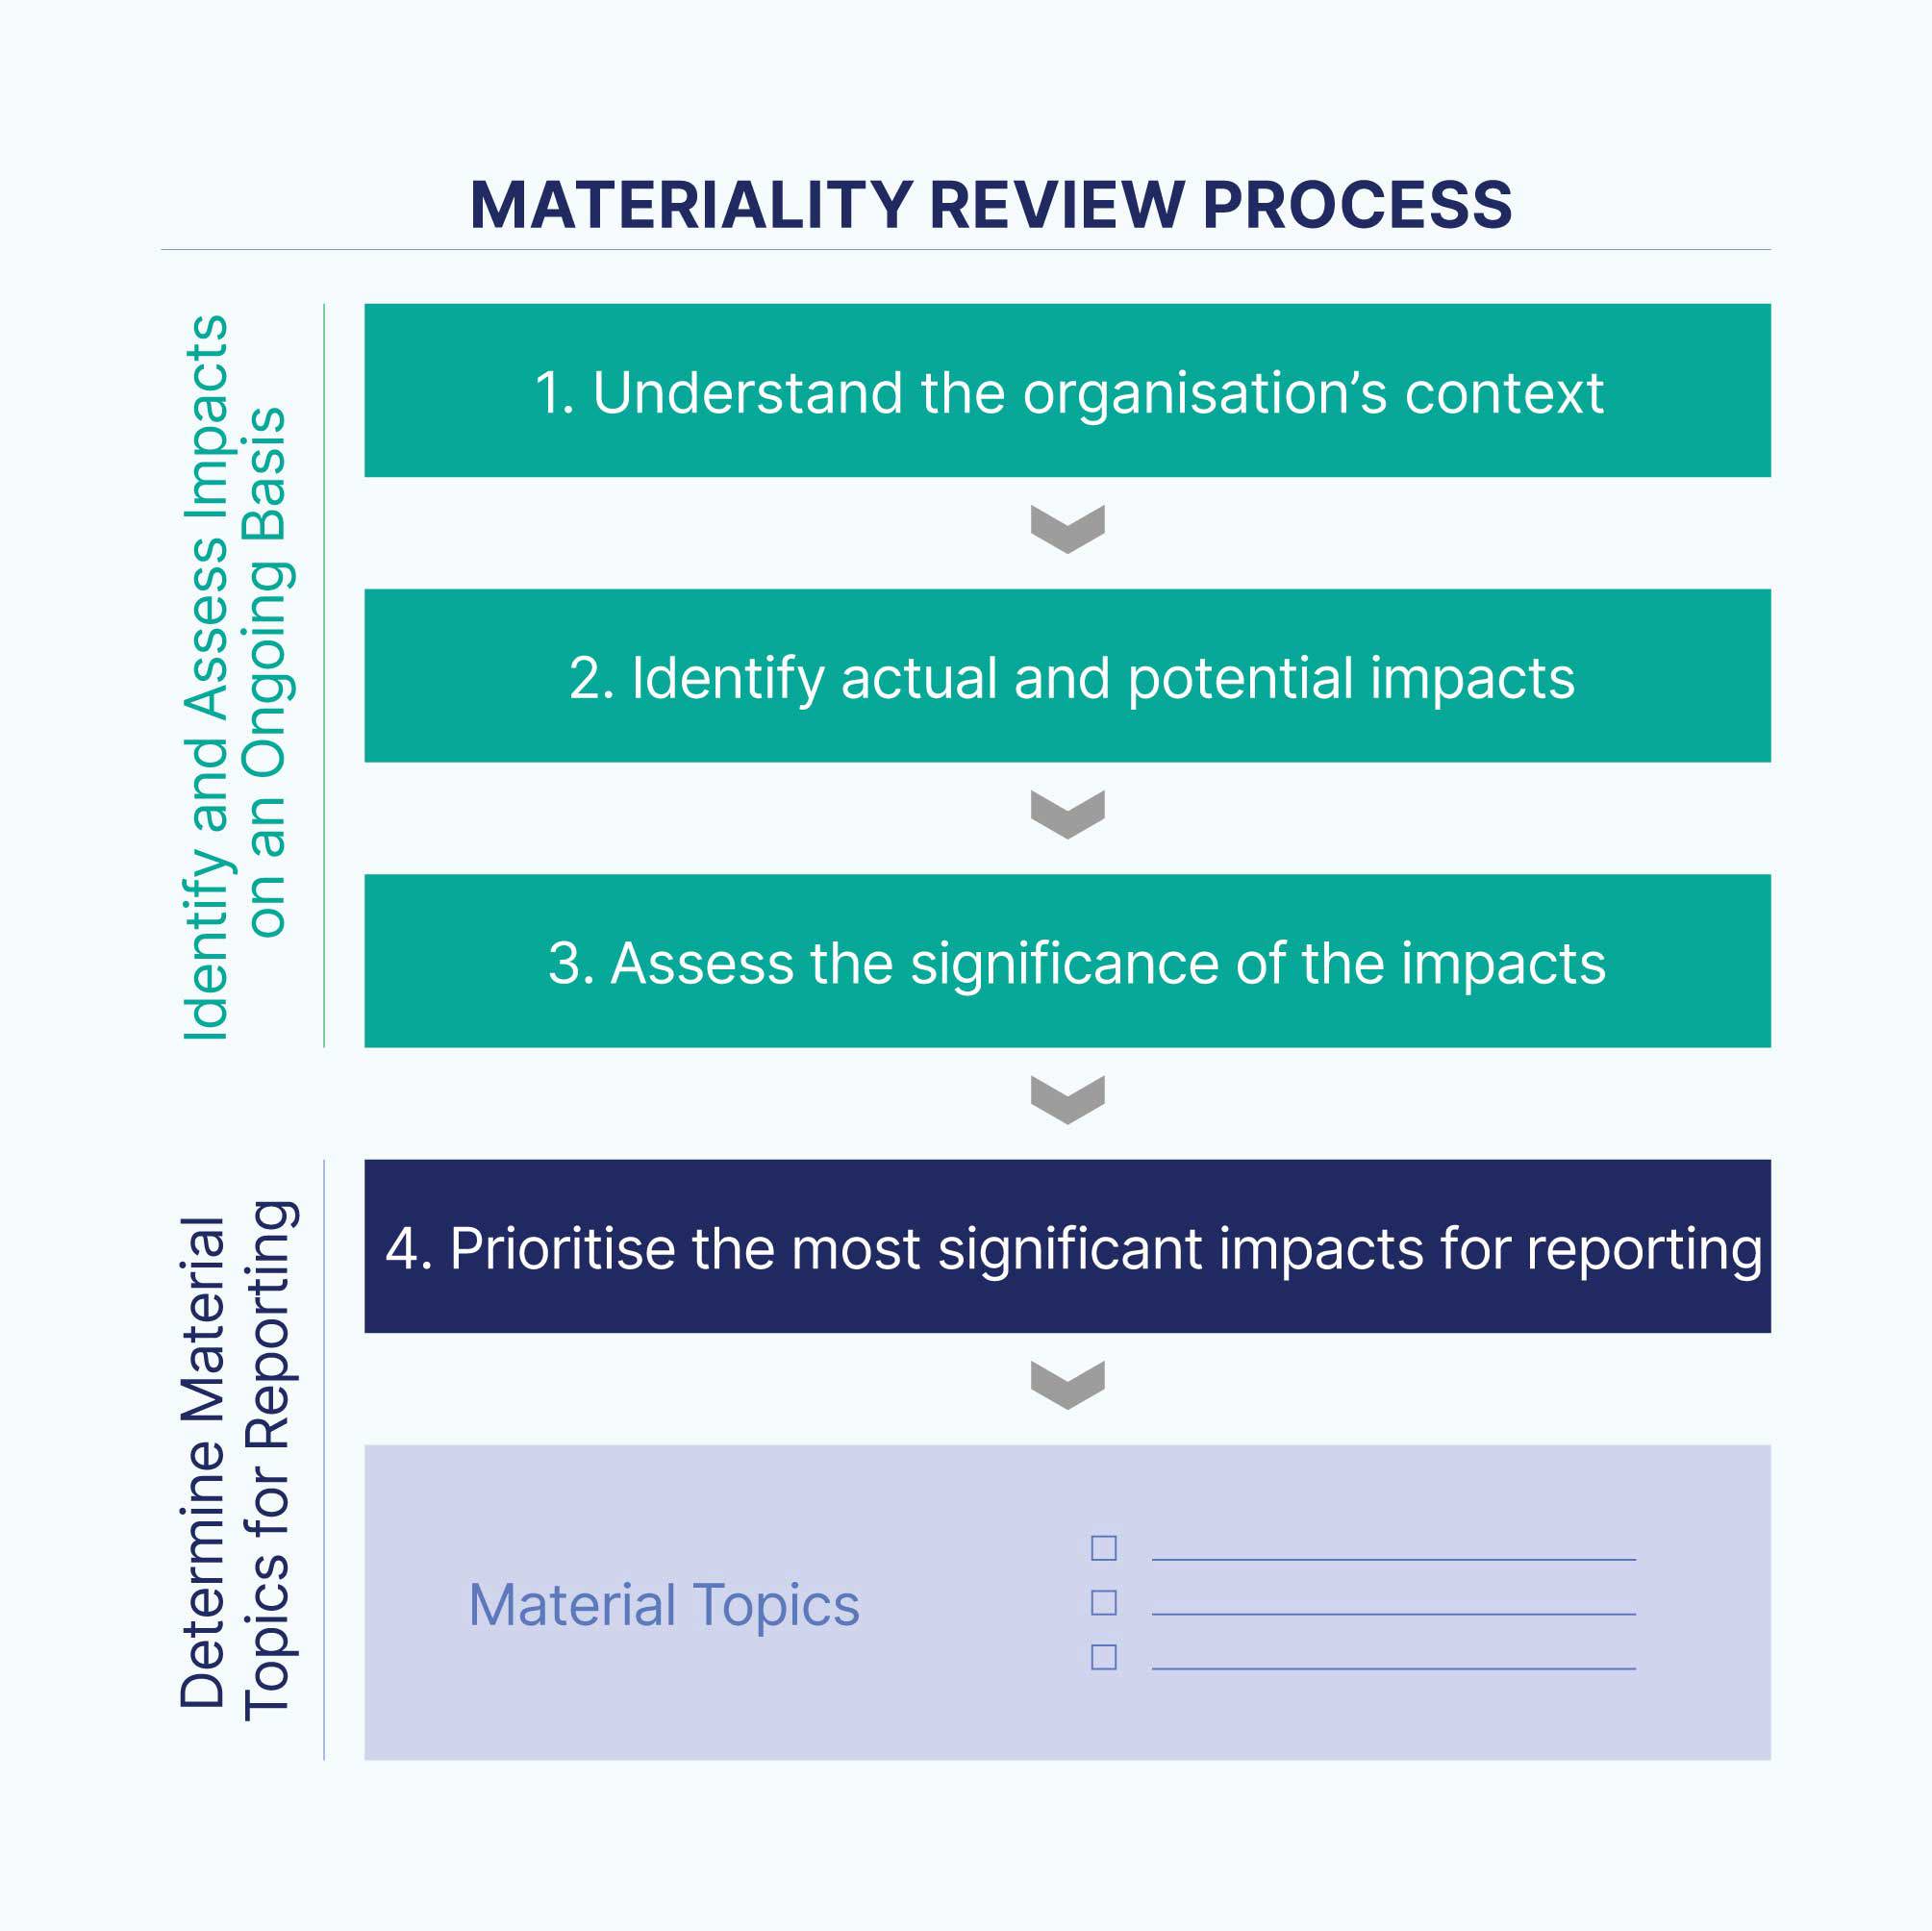 ST Engineering MATERIALITY REVIEW PROCESS